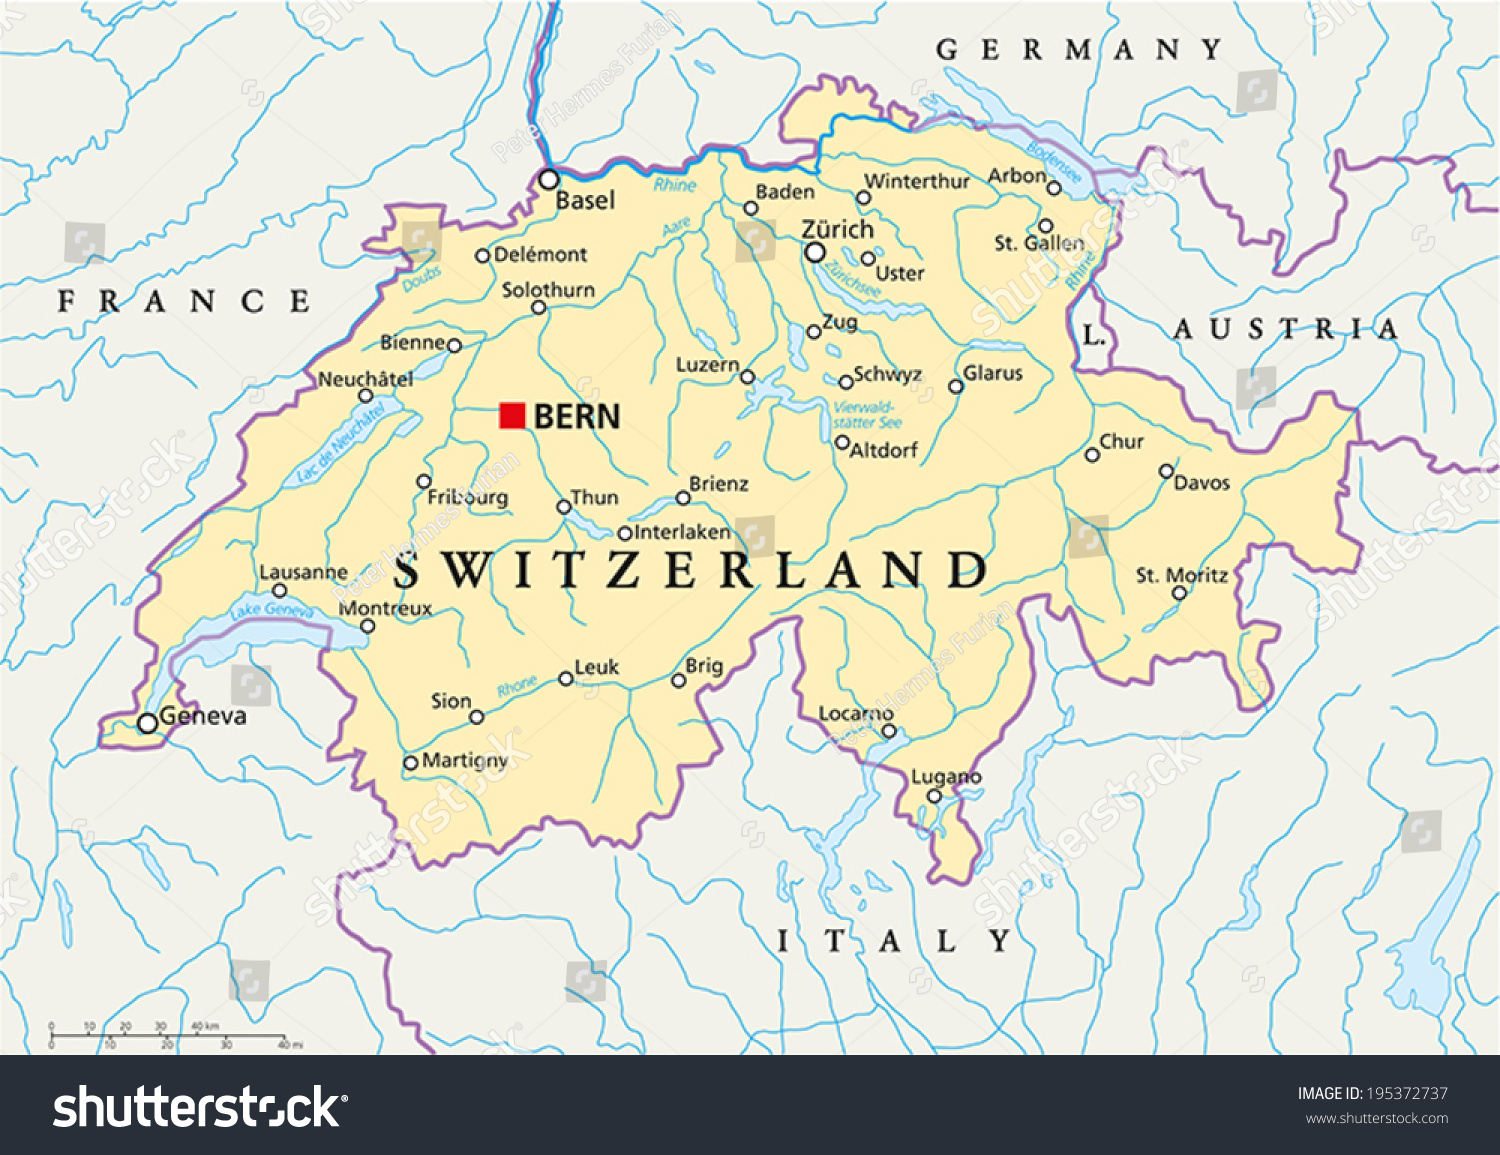 SVG of Switzerland Political Map with capital Bern, national borders, most important cities, rivers and lakes with english labeling and scale. Vector illustration using transparencies. svg